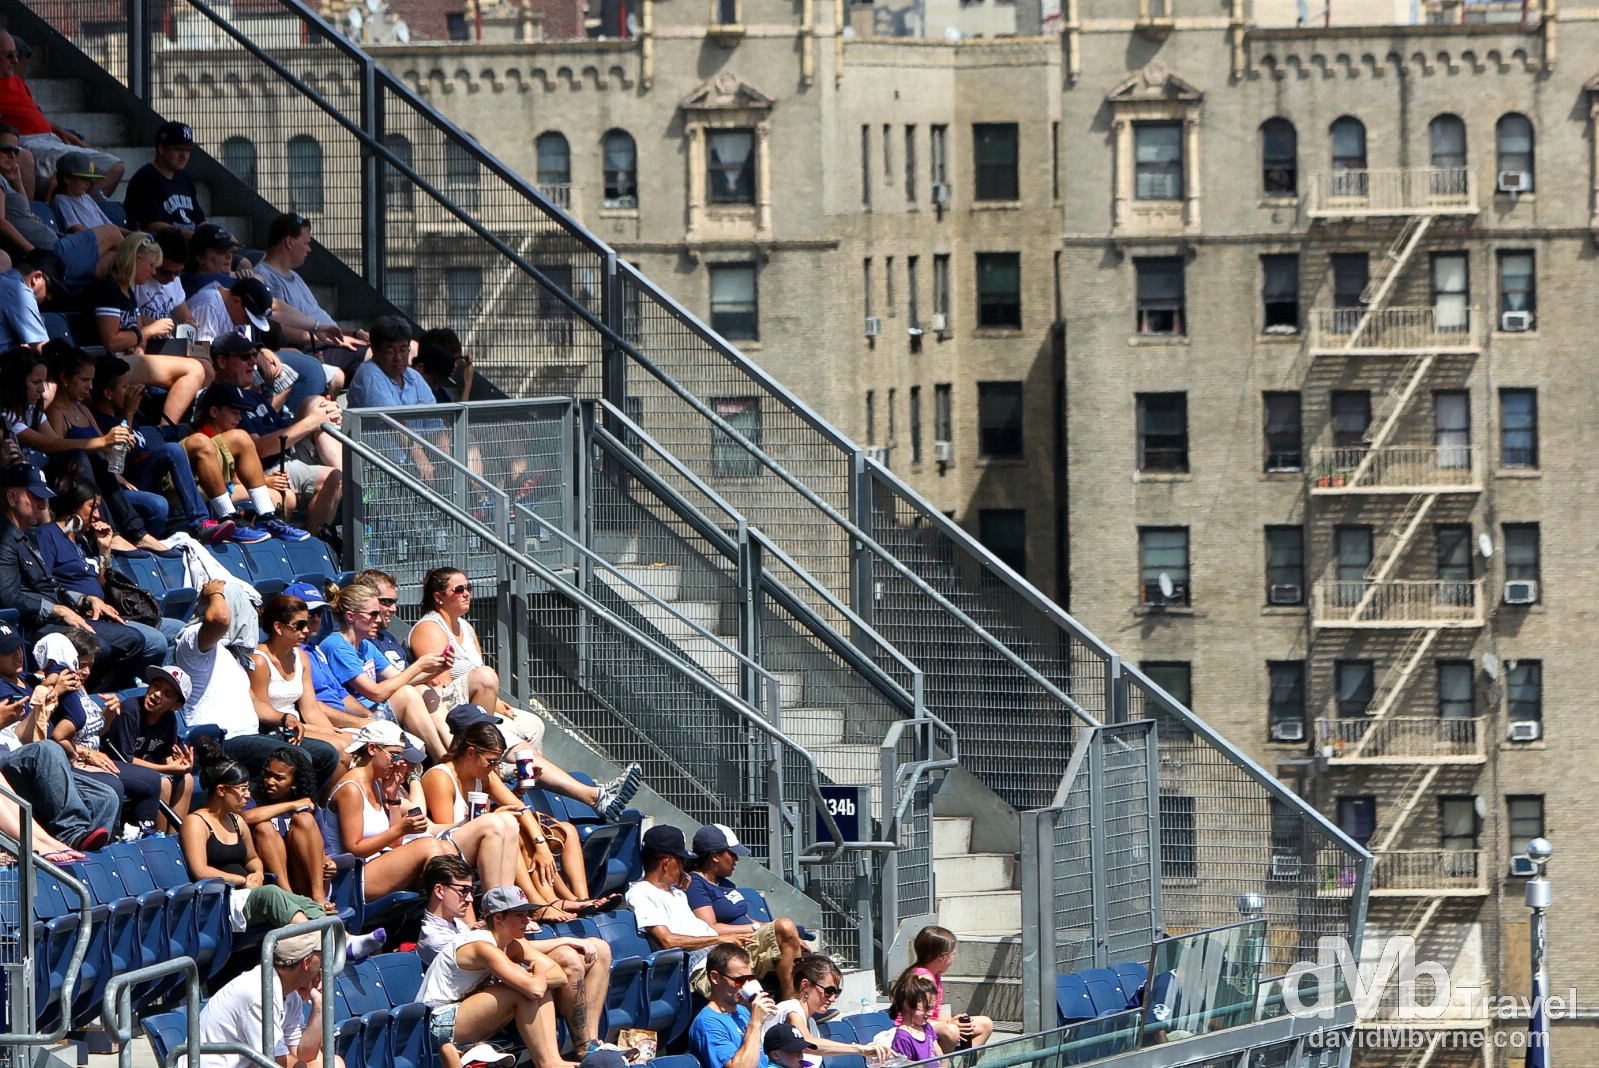 People in the stands at Yankee Stadium, The Bronx, New York. July 14th 2013. 